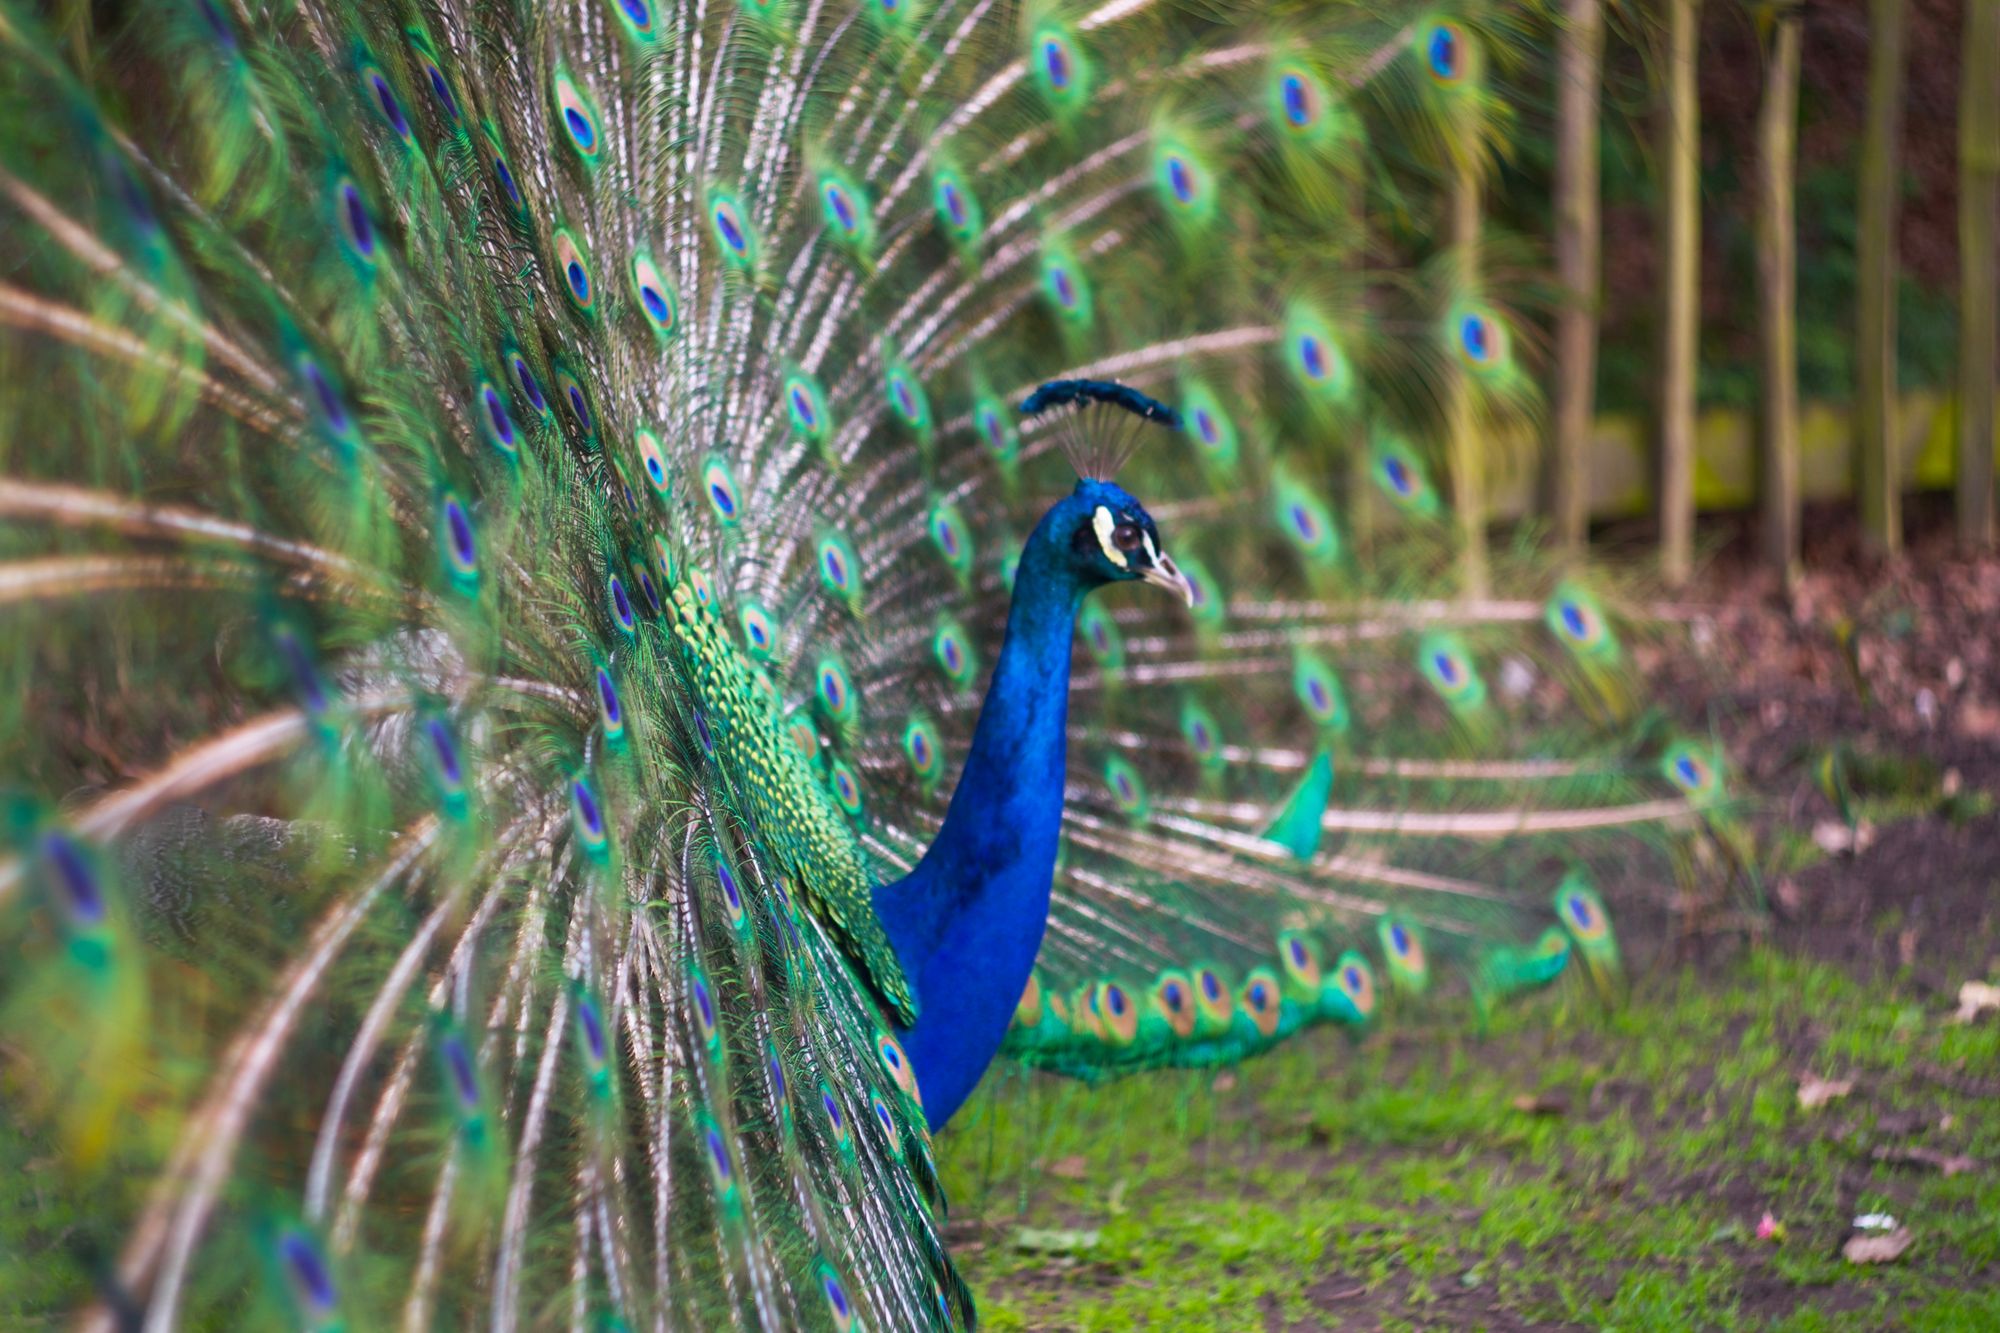 A proud peacock presents his crest to the right, his feathers partly out-of-focus and swirling as he dances